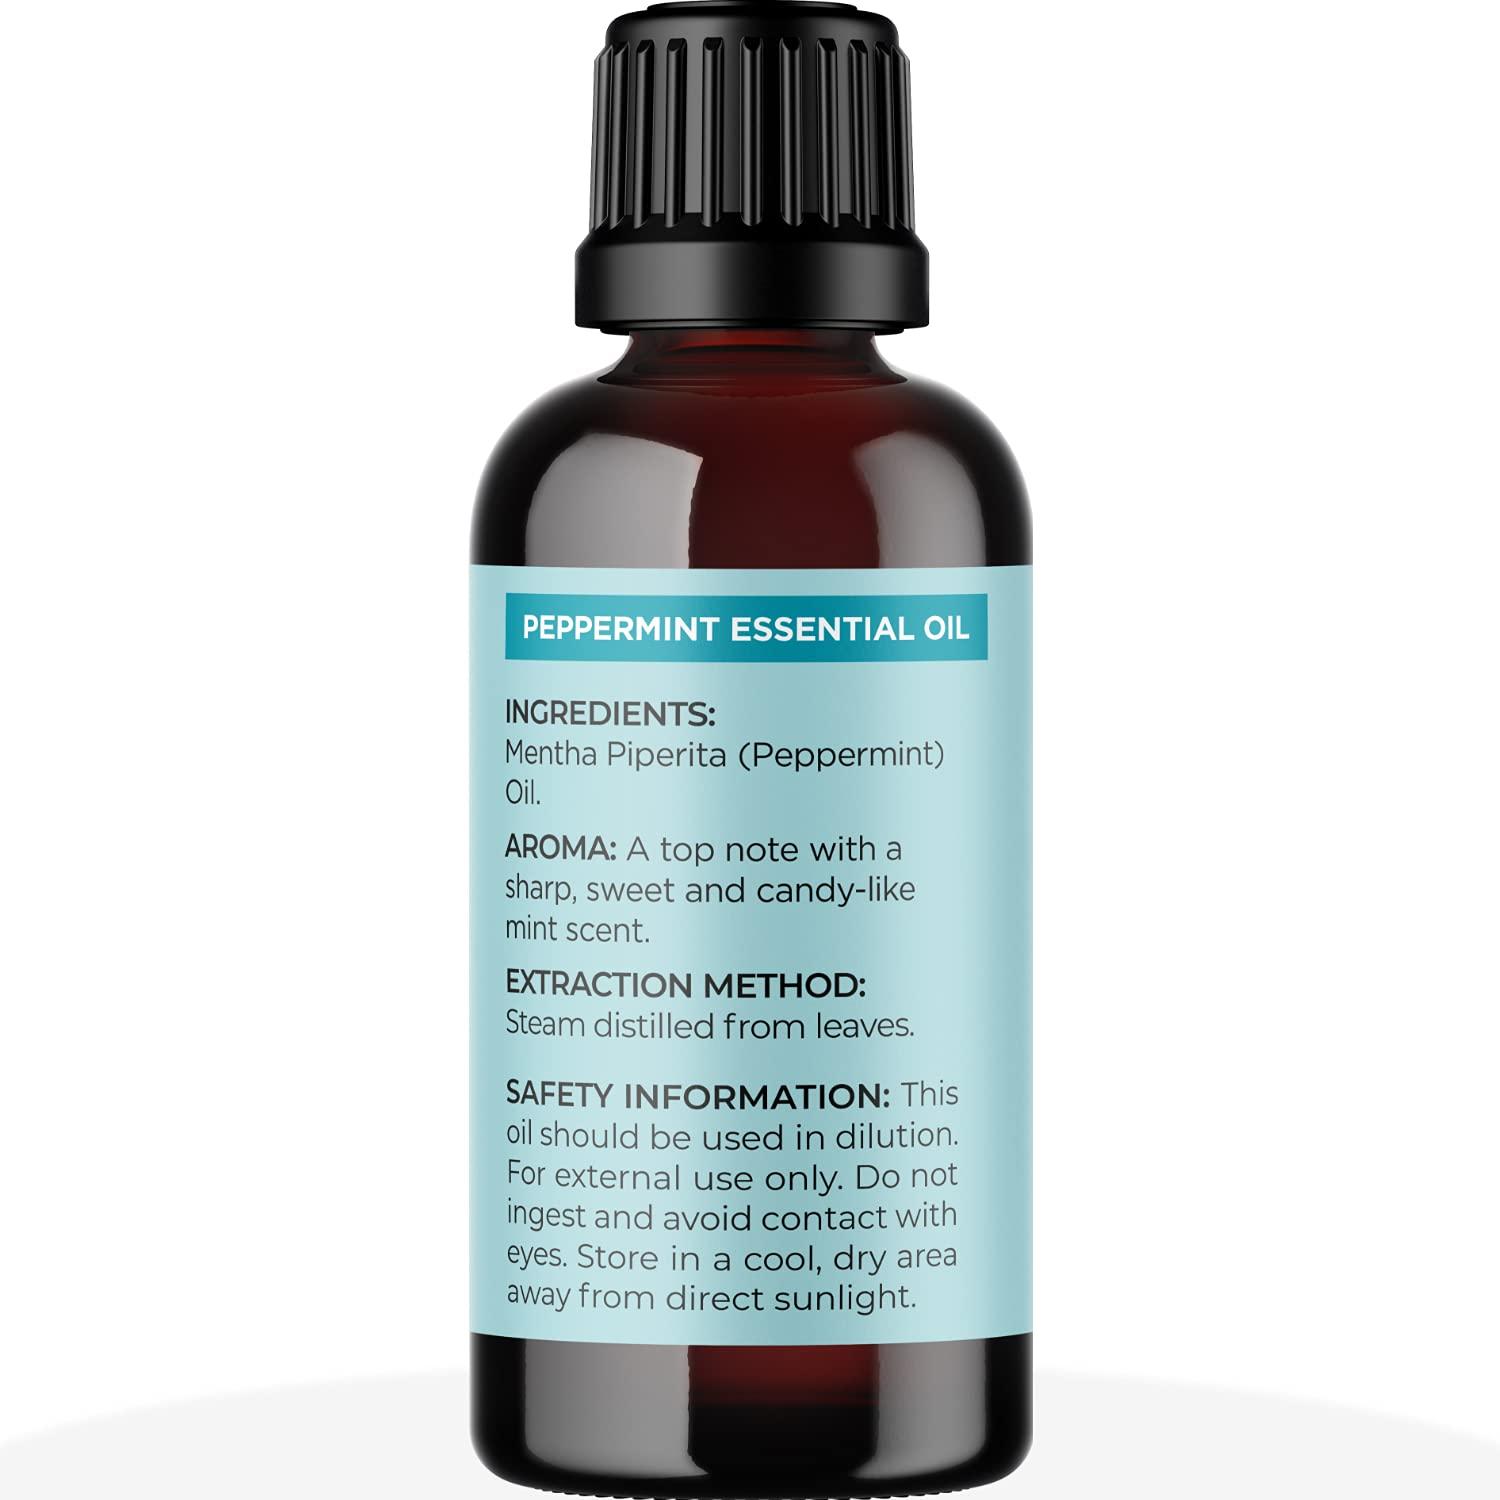 Peppermint Essential Oil for Diffuser Aromatherapy - 100% Pure Peppermint  Oil for Hair Skin and Nails Plus Undiluted Refreshing Aromatherapy  Essential Oil for Diffusers Baths and Topical Uses 1oz